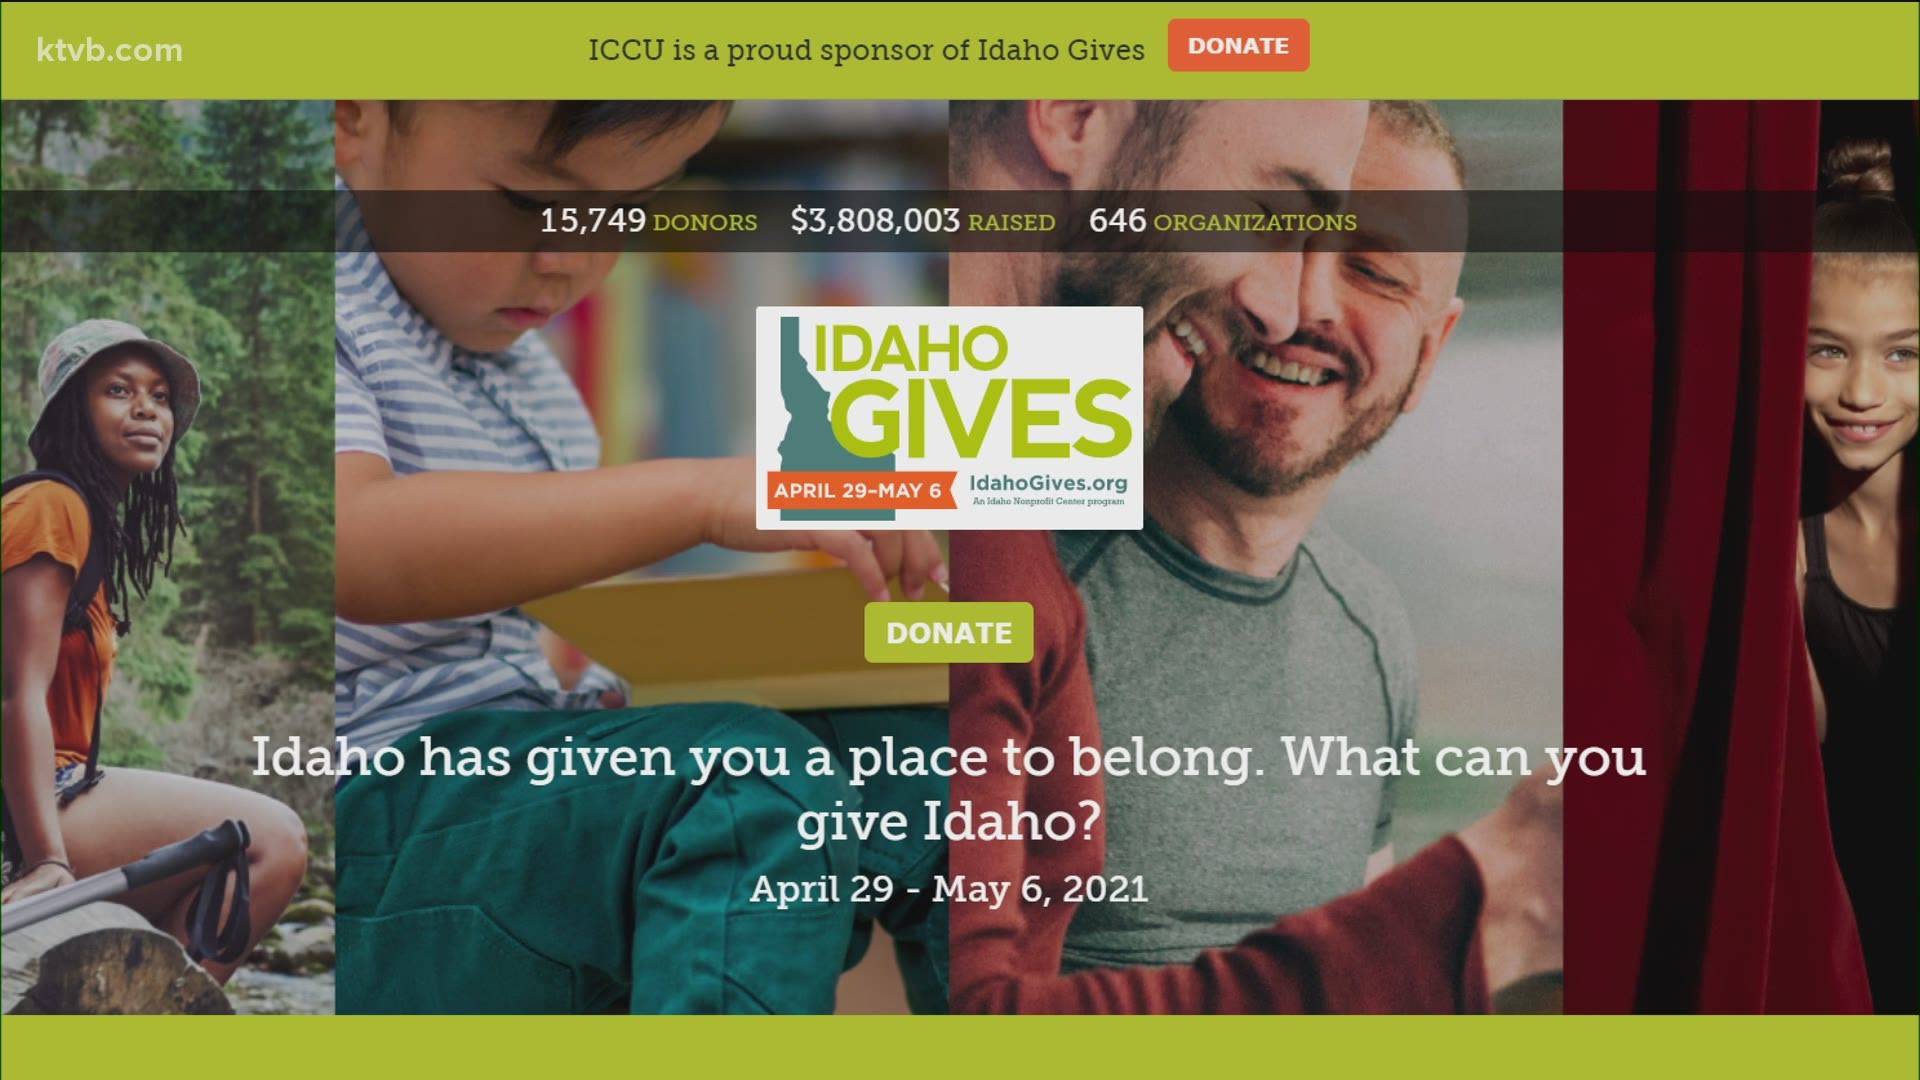 It was another generous year of giving by Idahoans to the Idaho Gives campaign which has now concluded for 2021.